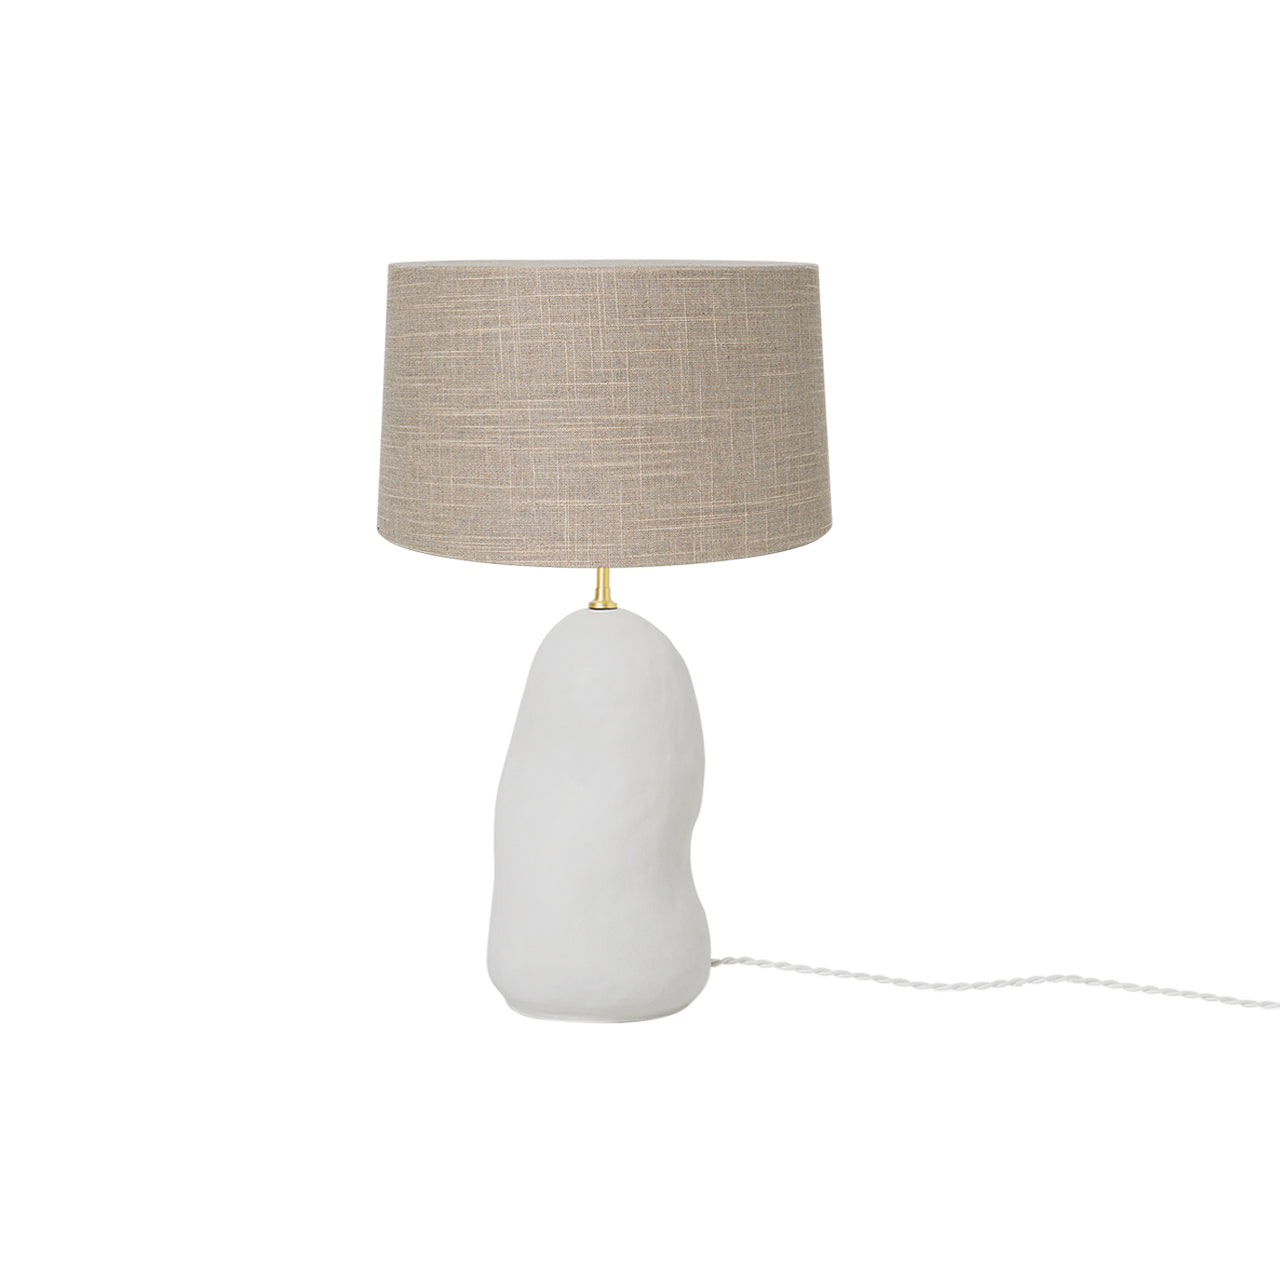 Hebe Lamp: Small + Sand + Off-White